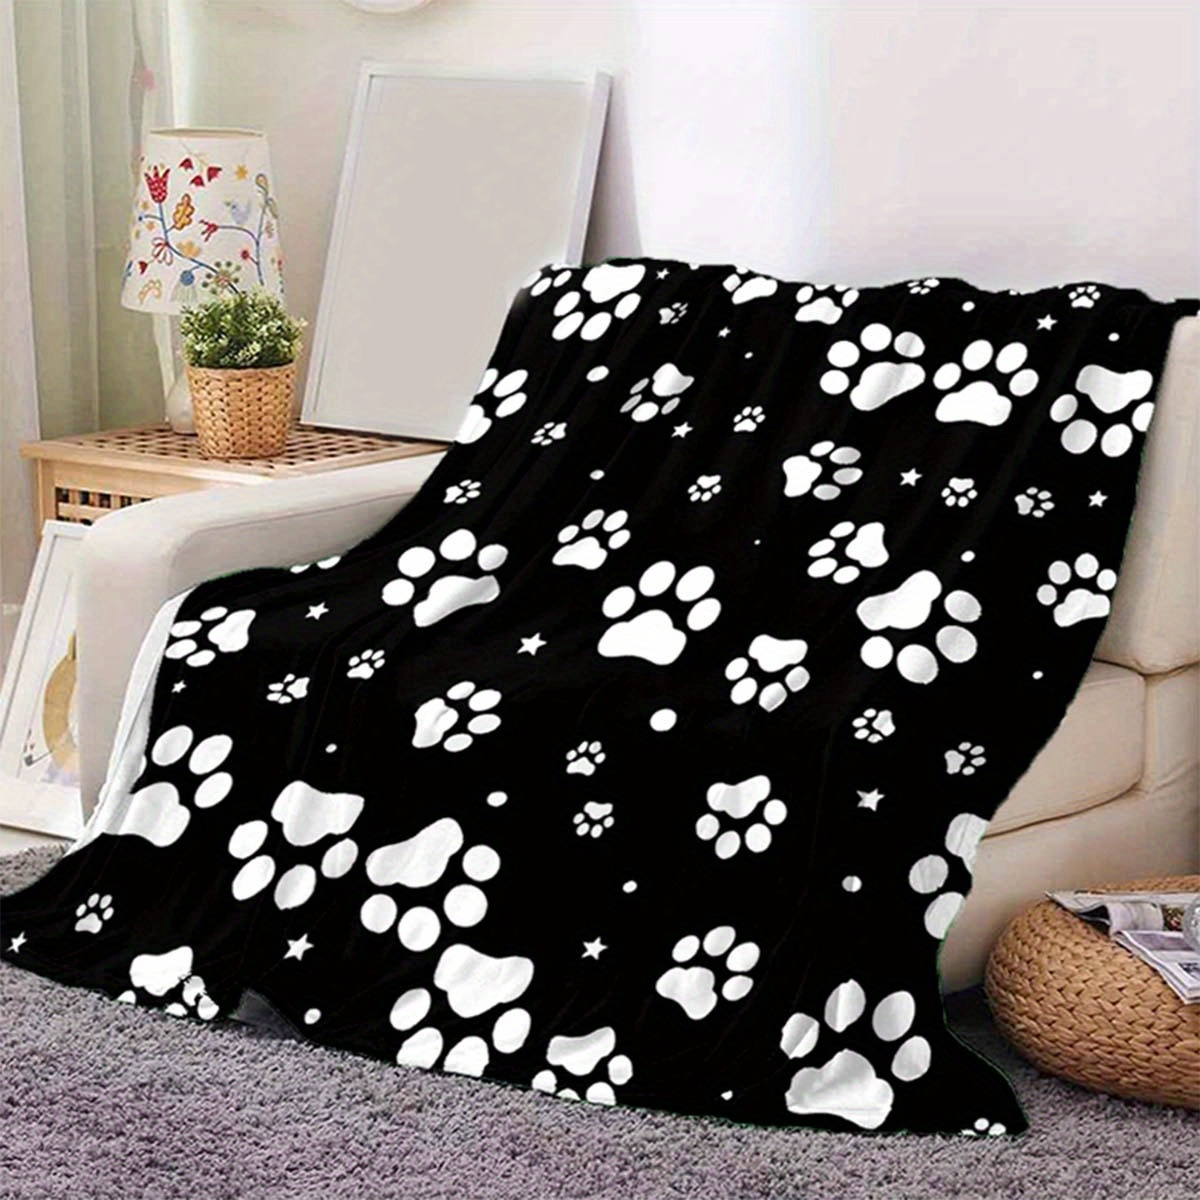 

Cozy 3d Dog Paw Print Soft Flannel Throw Blanket - Perfect For Sofa, Bed, Picnic, And Home Decor - Large Size